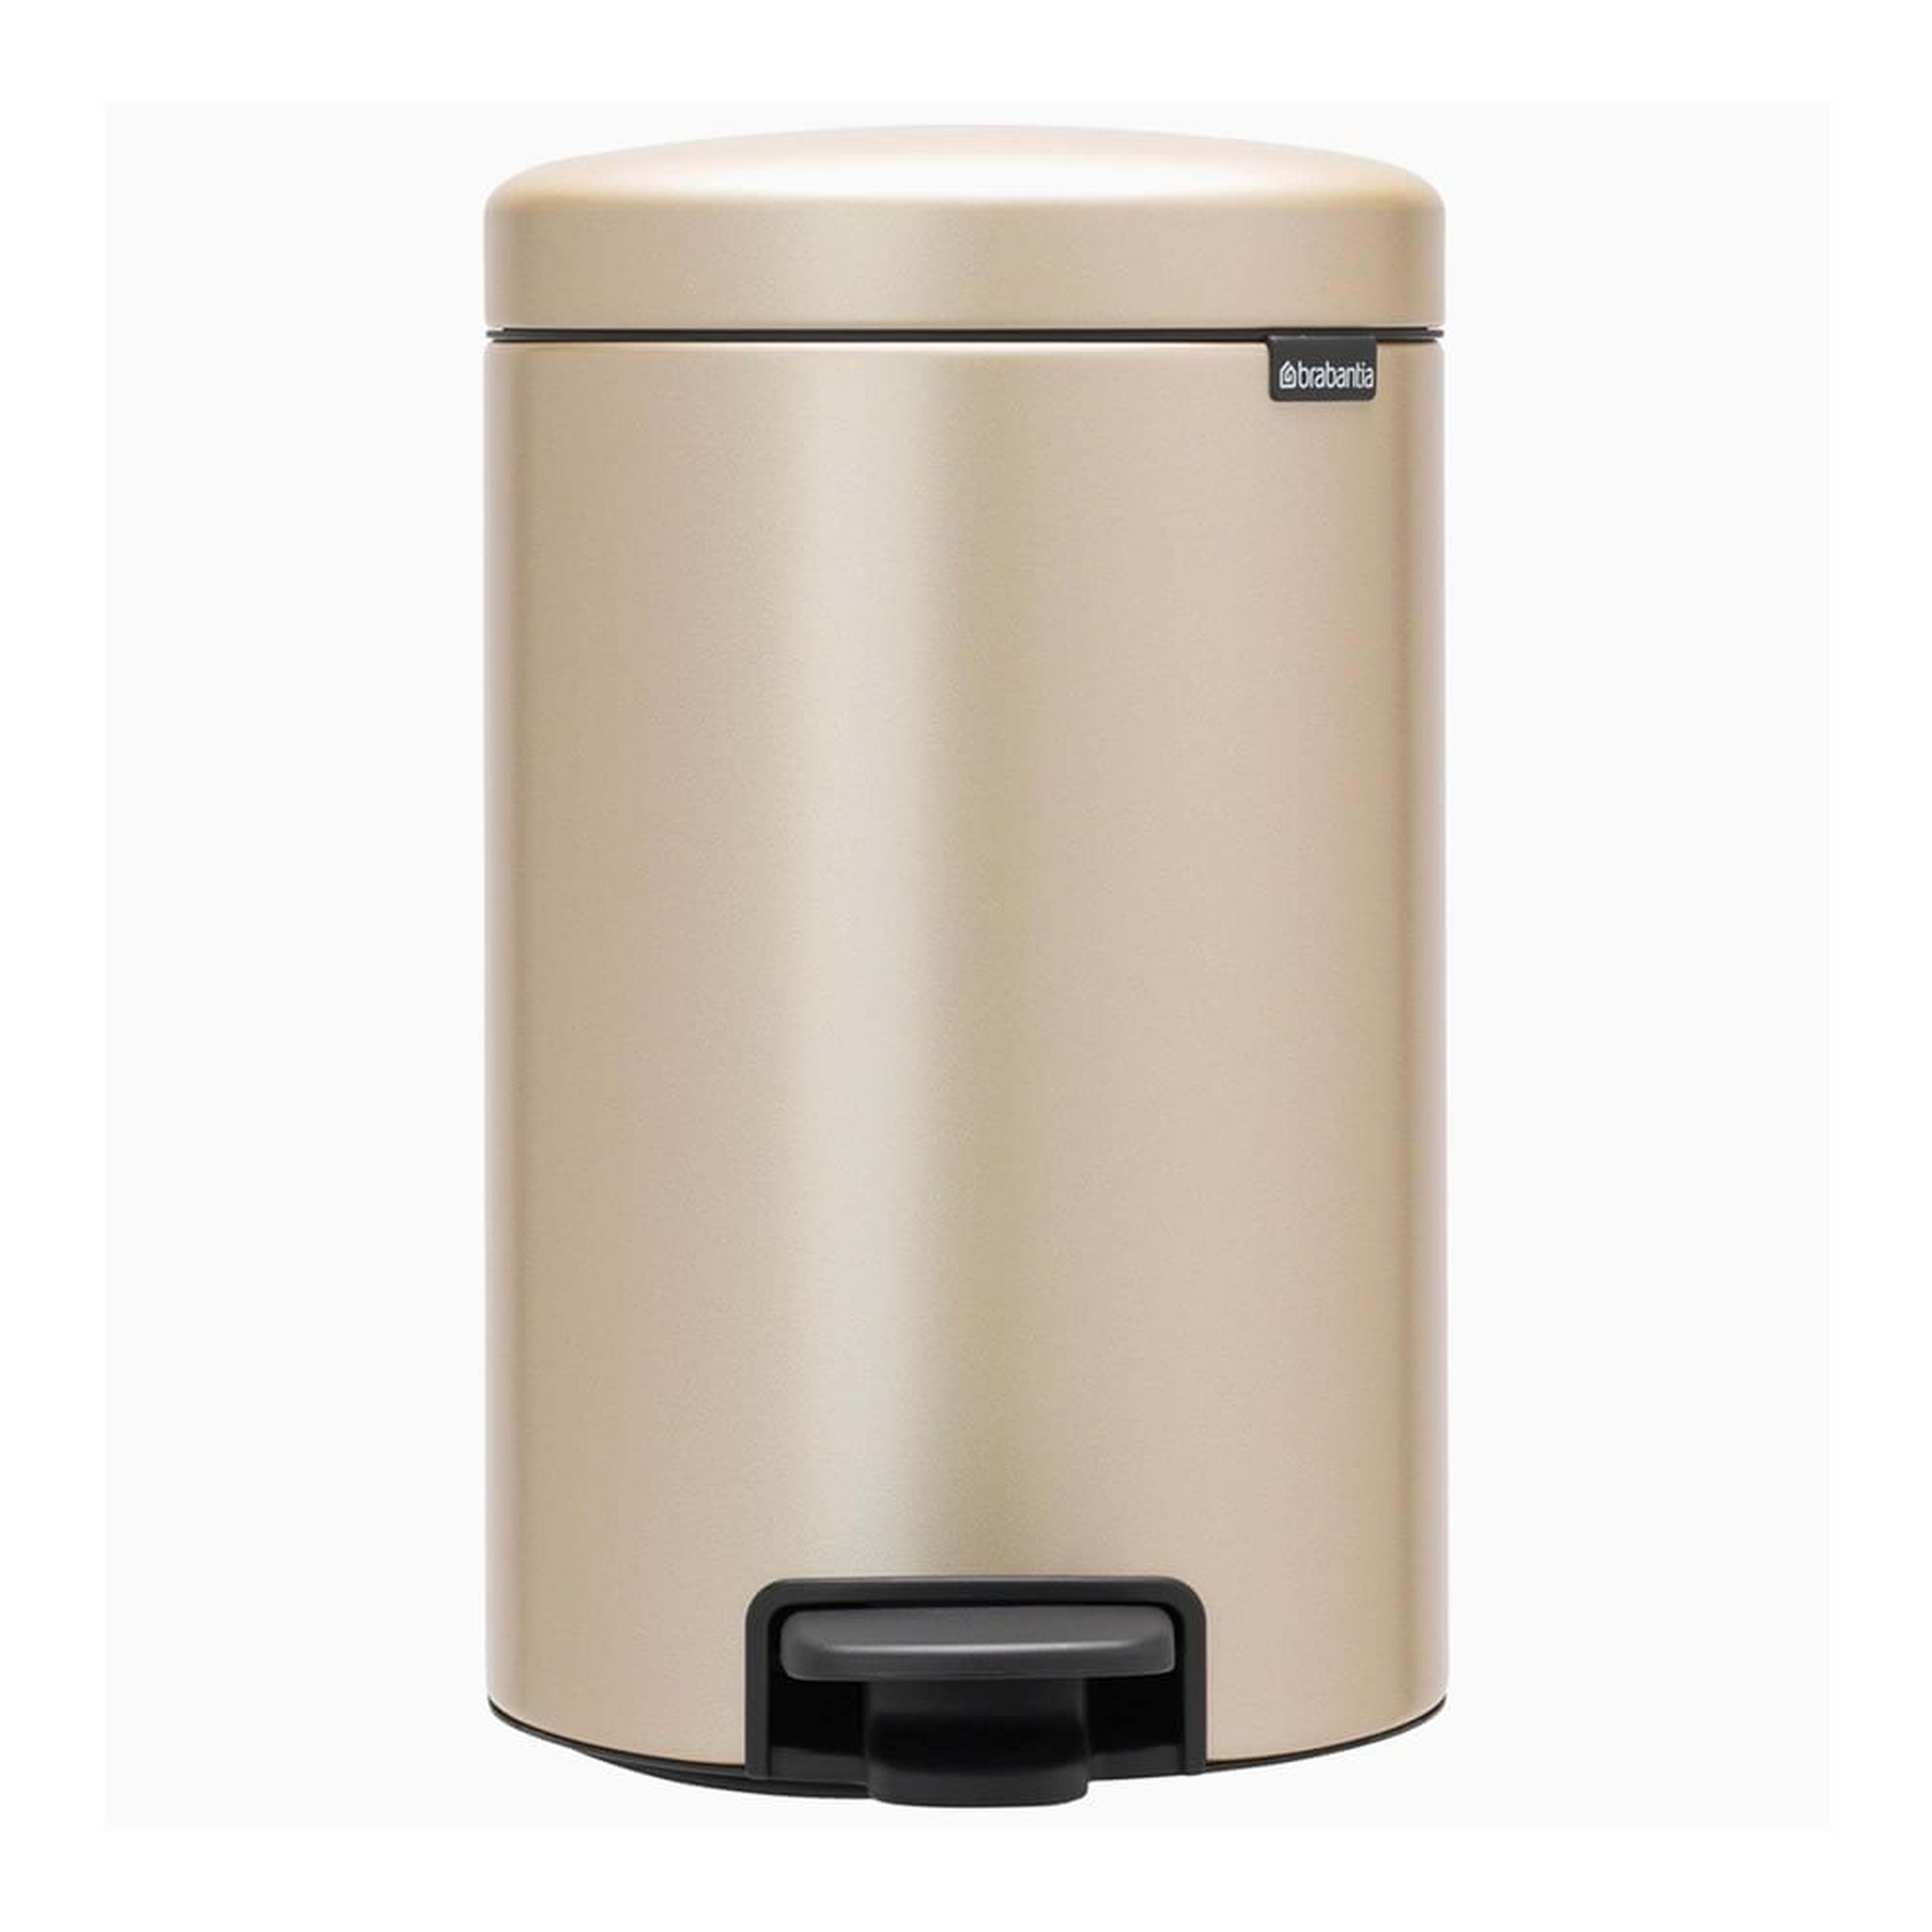 Brabantia New Icon Step Trash Can, 3.2 Gallon, Champagne - West Elm